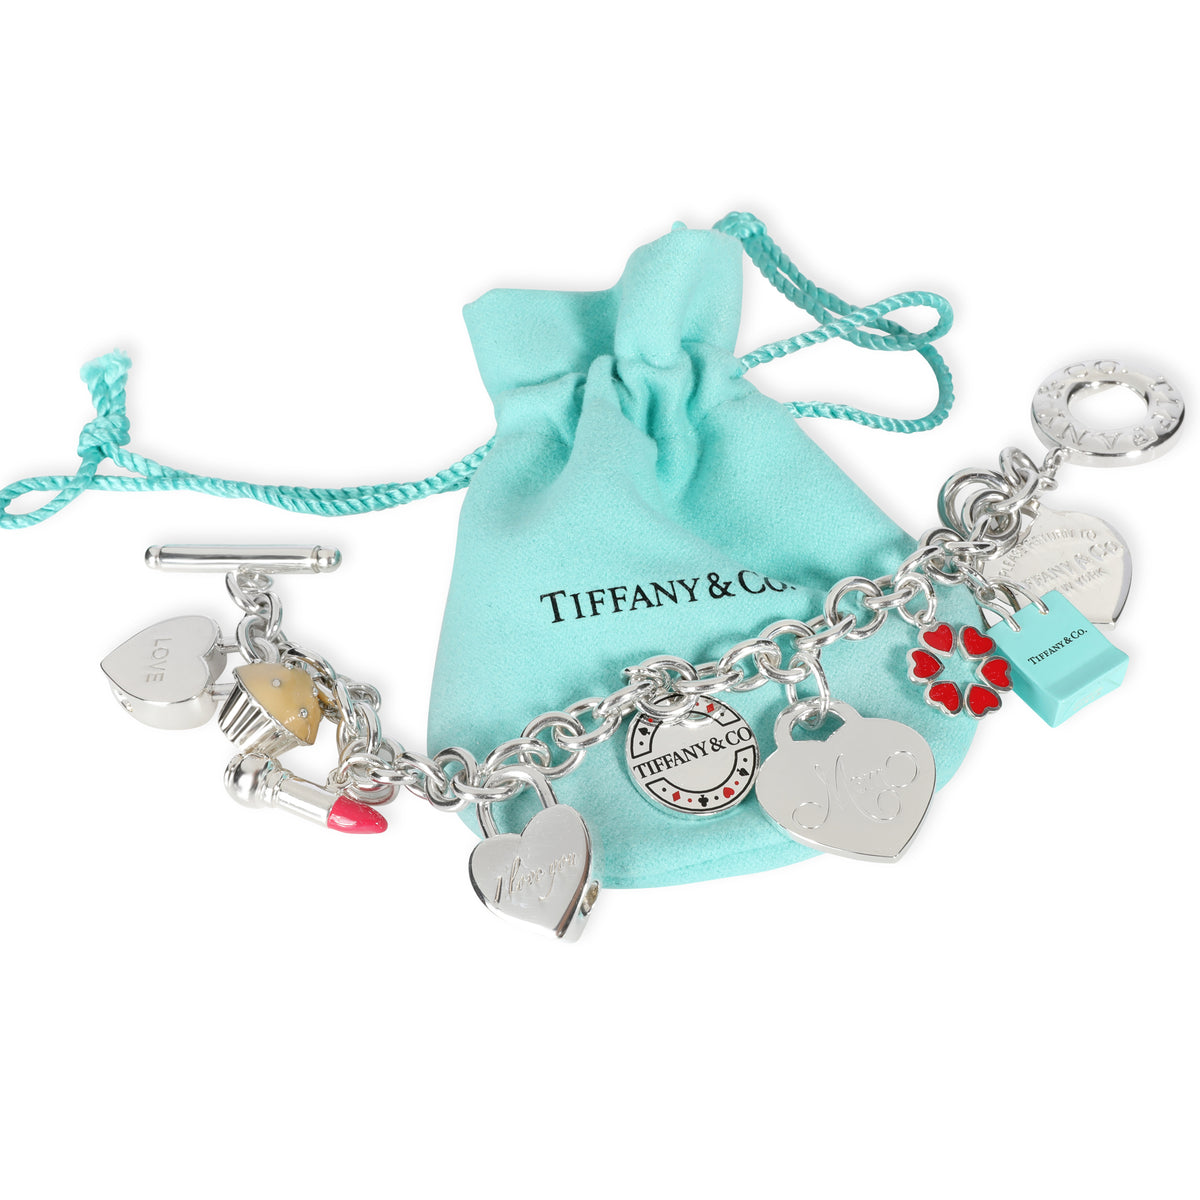 Return to Tiffany Toggle Charm Bracelet in Sterling Silver - 9 Charms